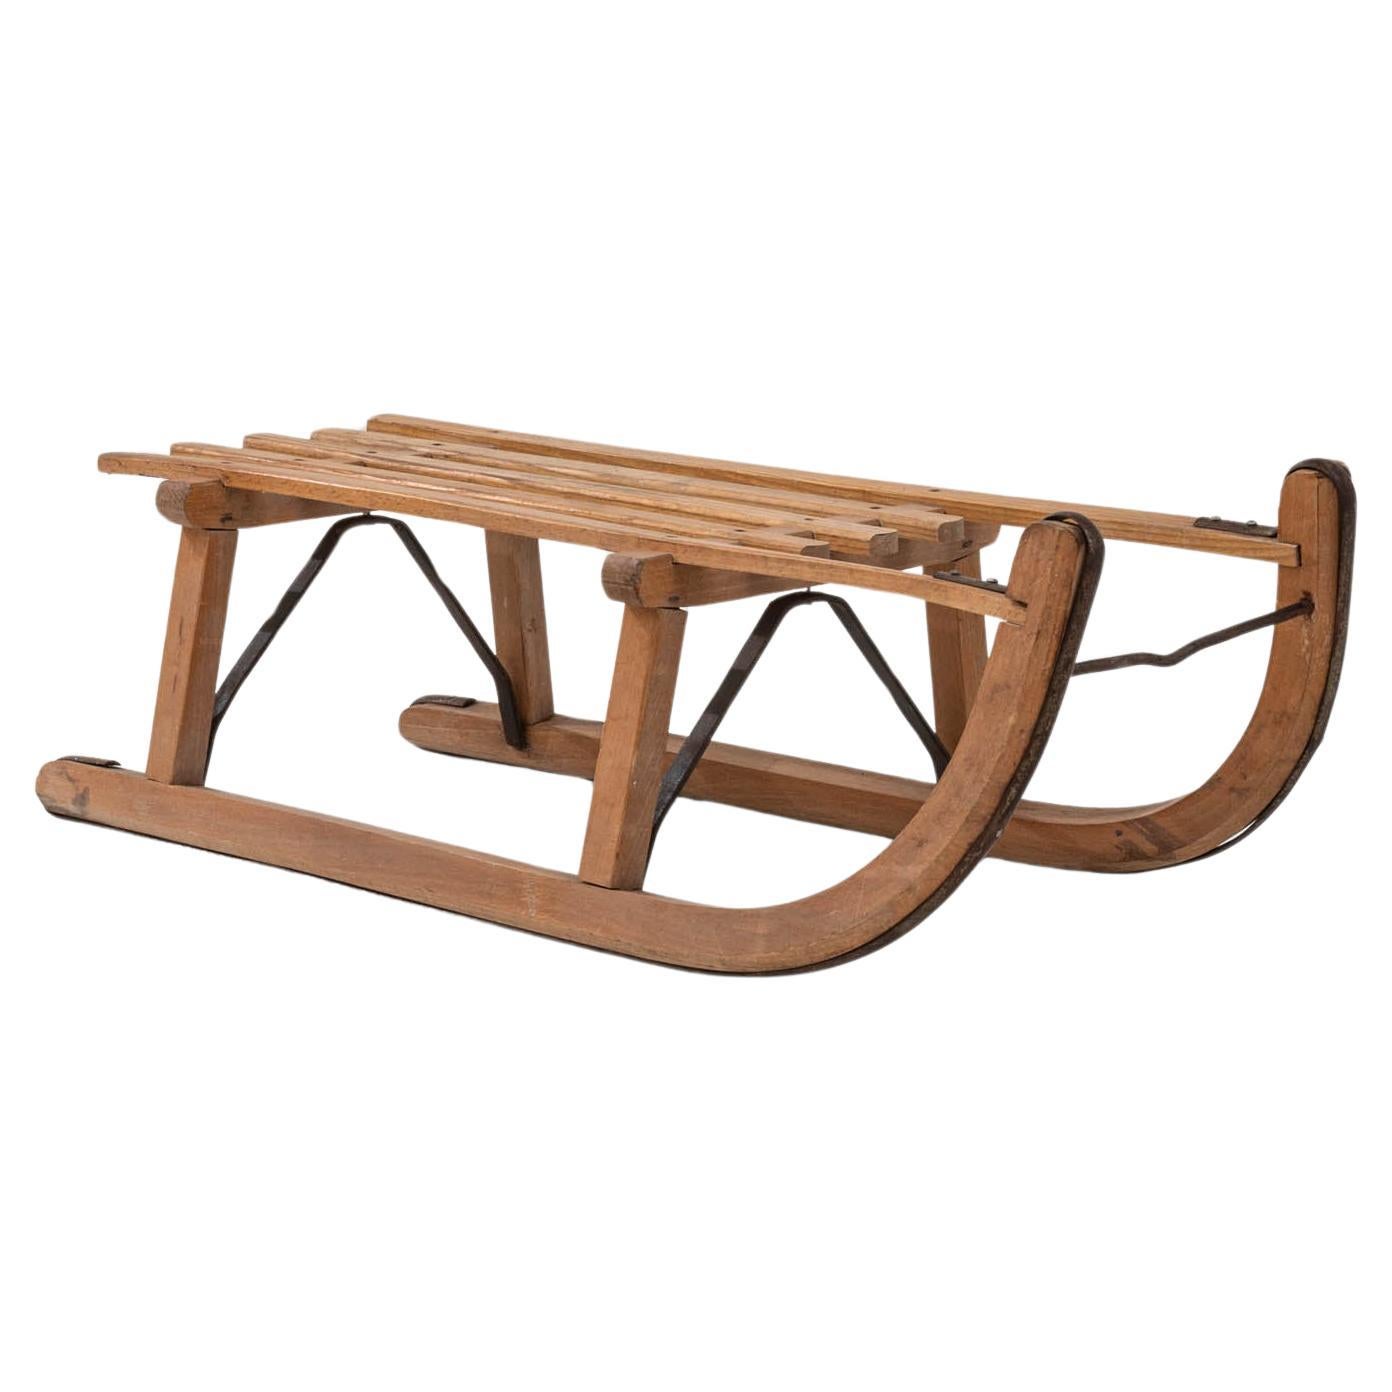 20th Century German Wooden Sled By Davos